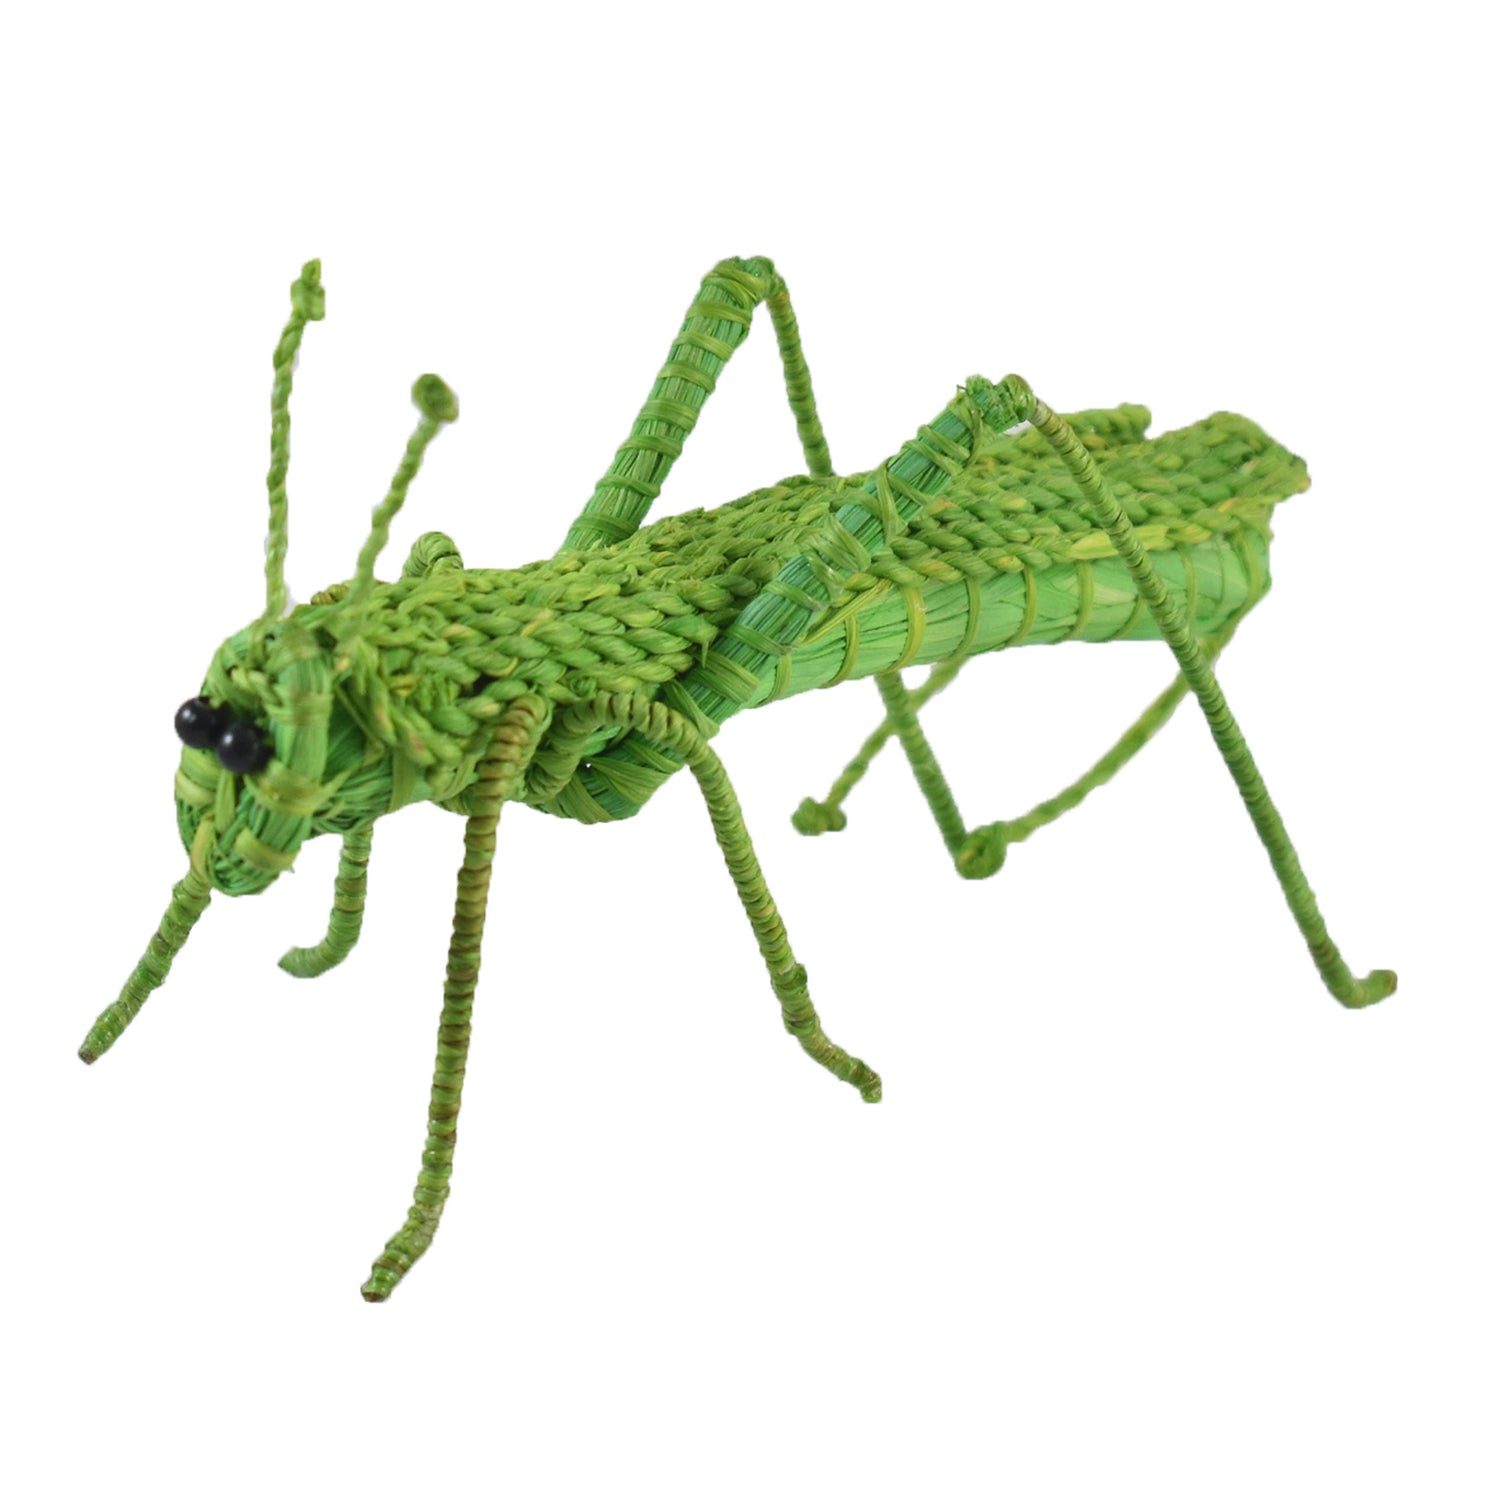 GRASSHOPPER WOVEN INSECT ORNAMENT - HAND-MADE BY ARTISAN FROM THE PERUVIAN AMAZON